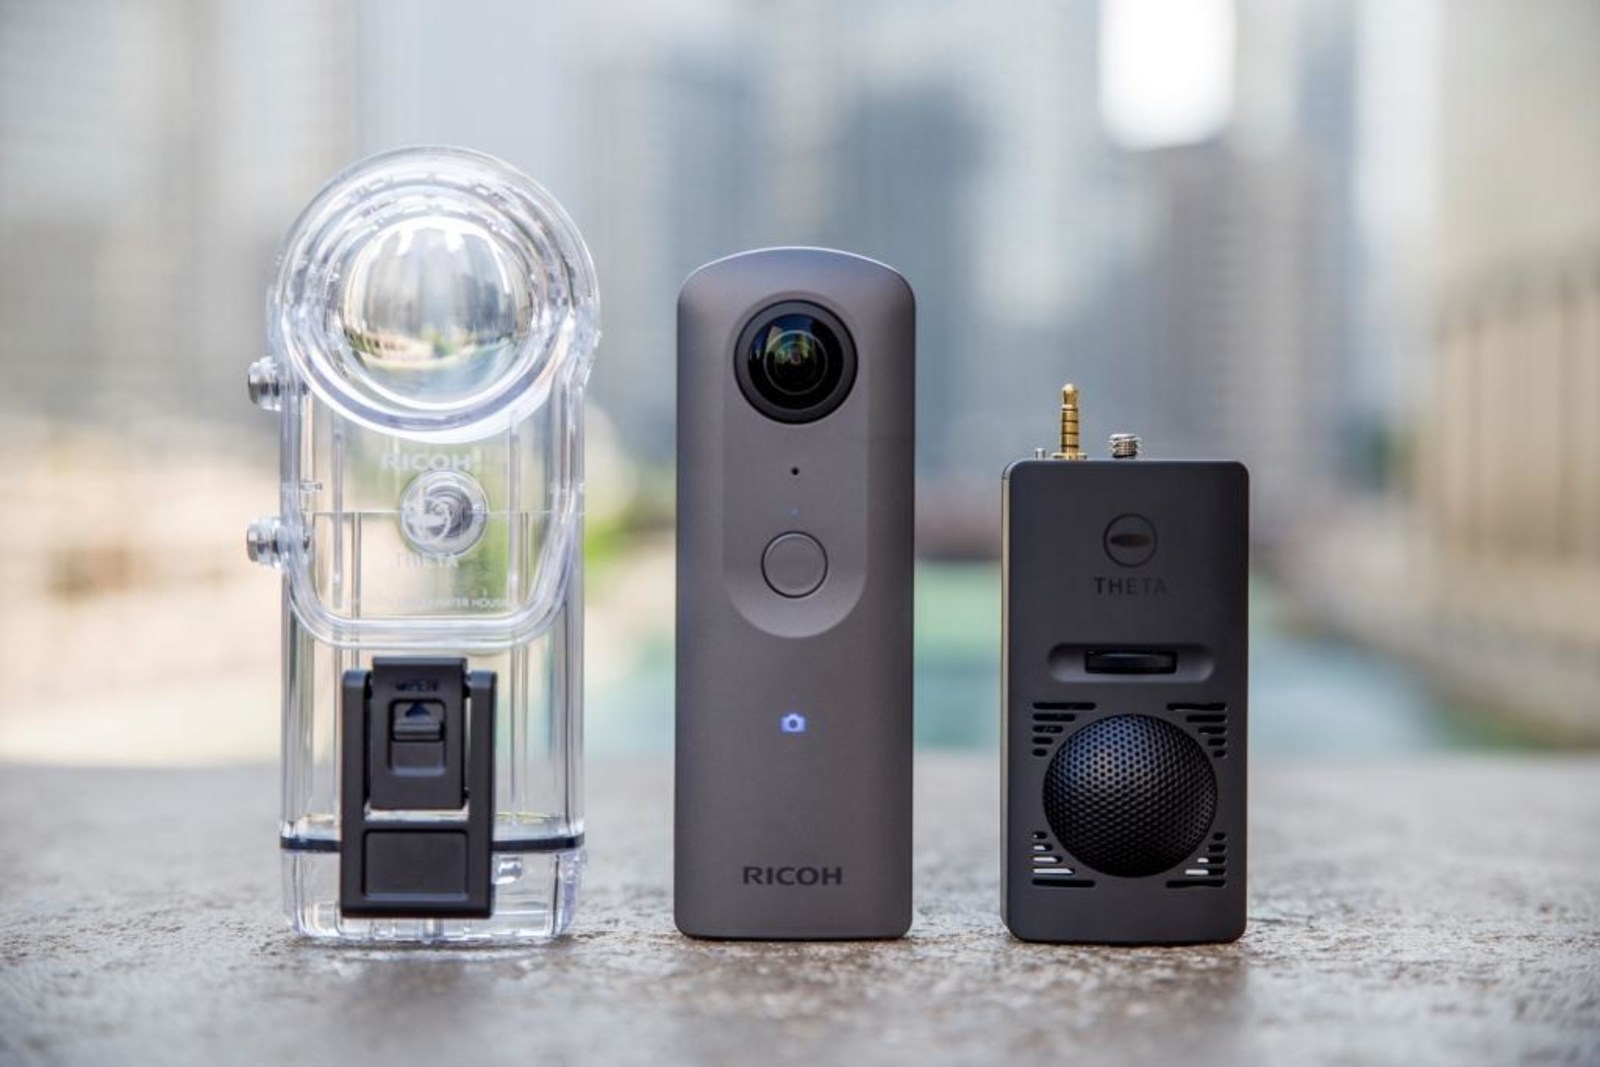 Ricoh Theta V 360-degree camera with 4K video and spatial audio (center) was announced today, along with accessory Underwater Case TW-1 (left) and 3D Microphone TA-1 (right). Source: Ricoh